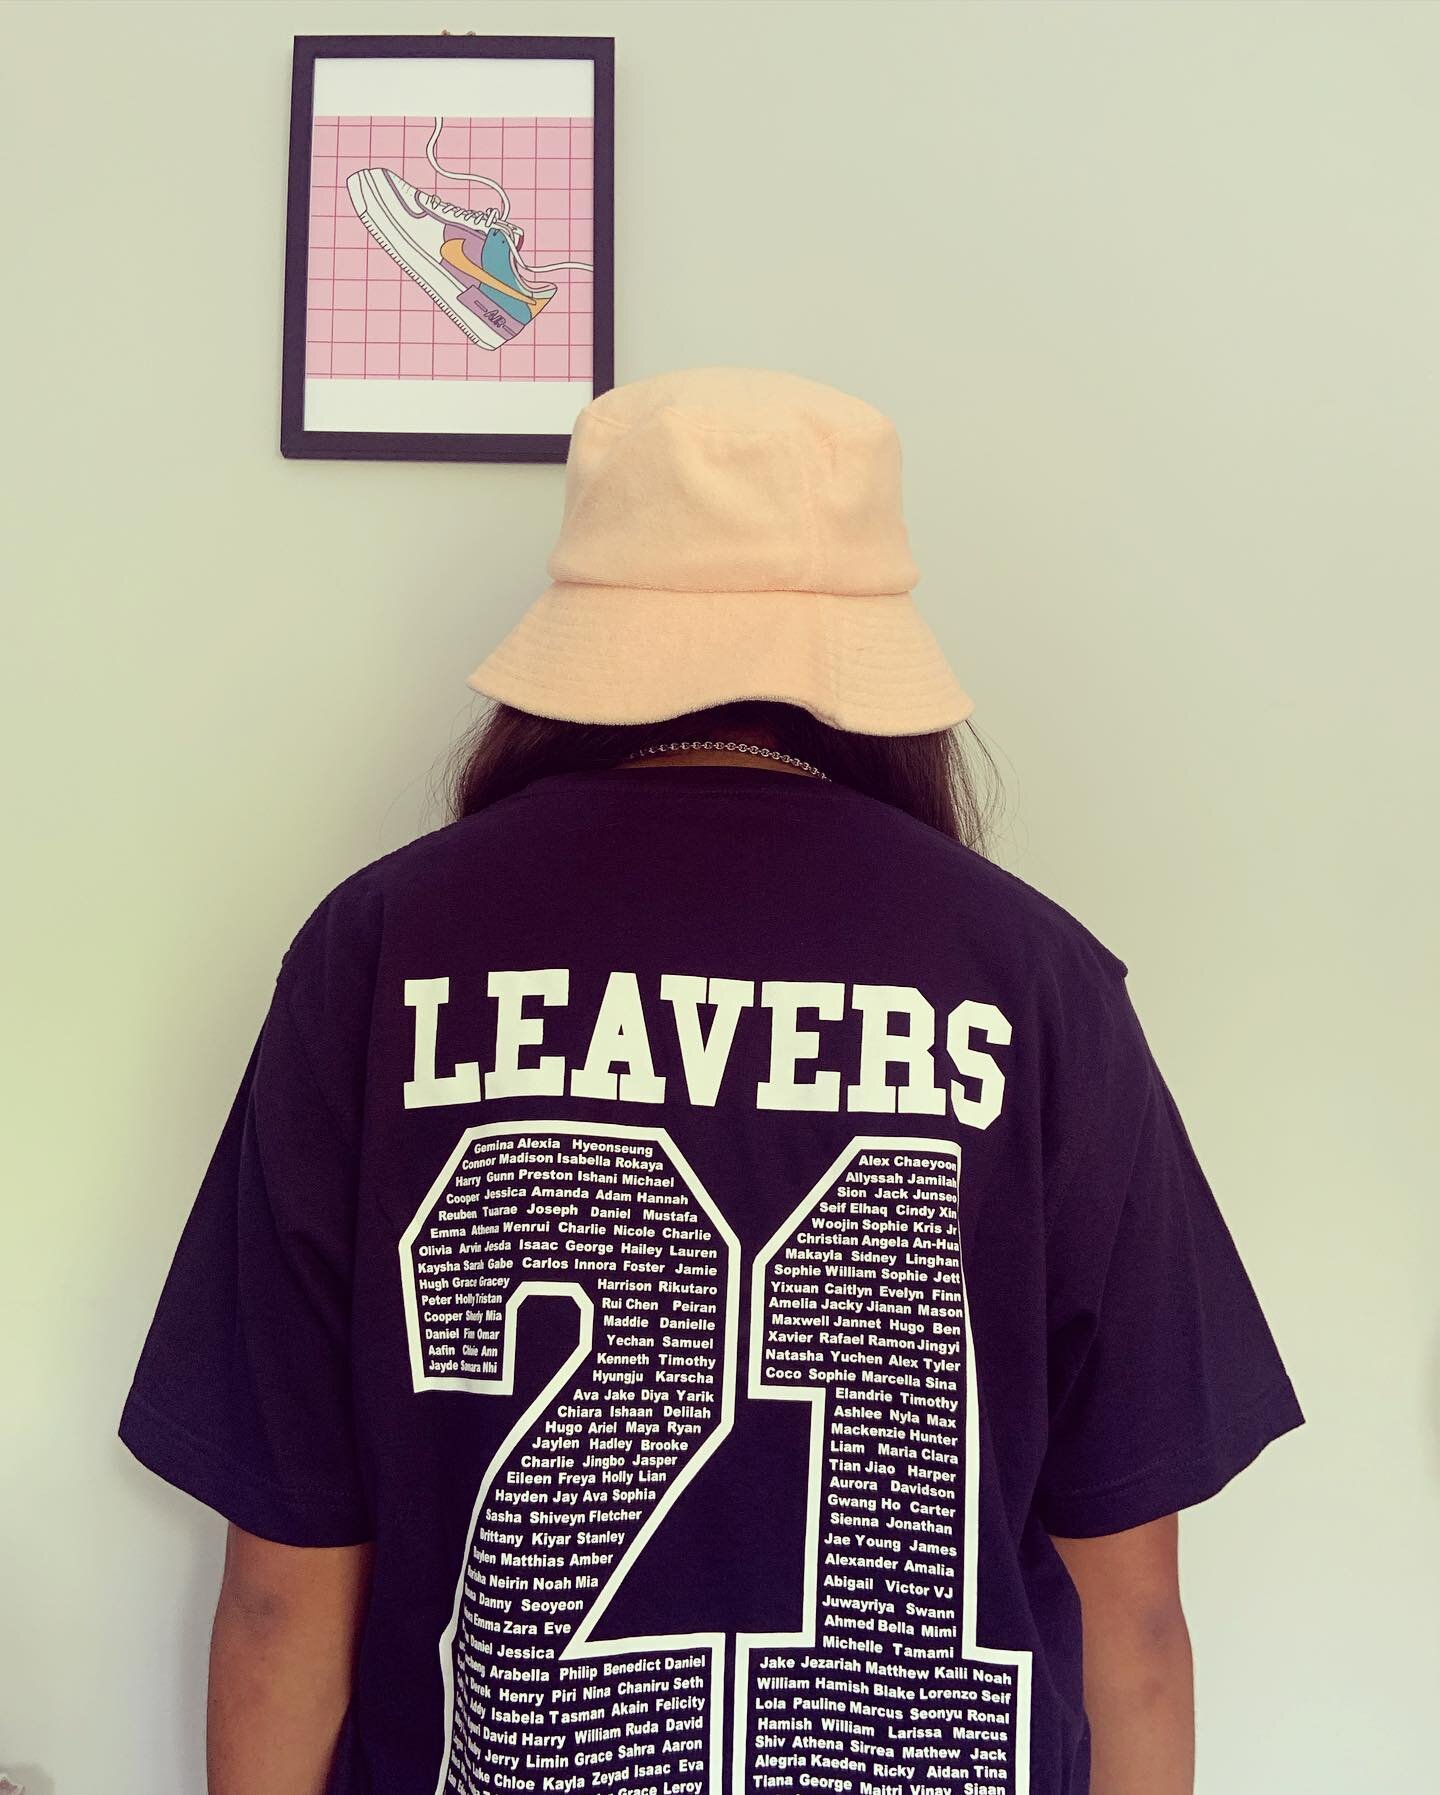 🚨 SCHOOL LEAVERS 🚨

It&rsquo;s not too early to organise your Leavers gear for 2022 in fact the earlier the better. Supply is fast becoming an issue across the industry so we suggest beating the rush and securing your order and VELA Wear are happy 